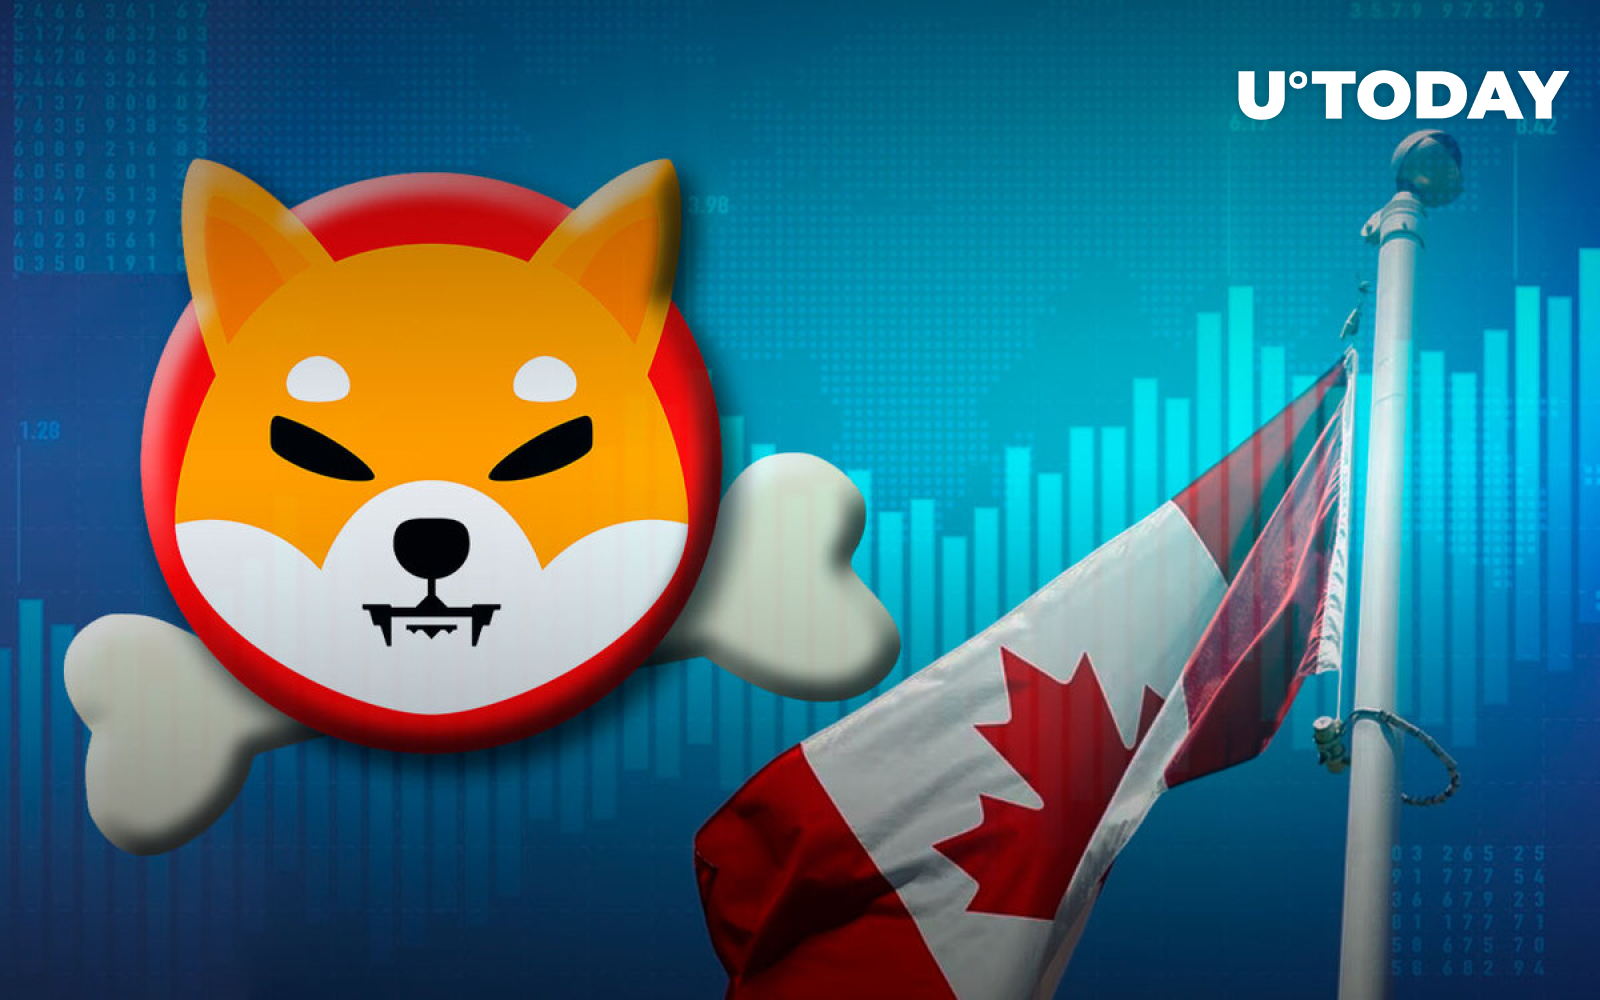 Shiba Inu’s BONE Trading Volume Hit 83% Within 24 Hours of Listing on Canadian Exchange